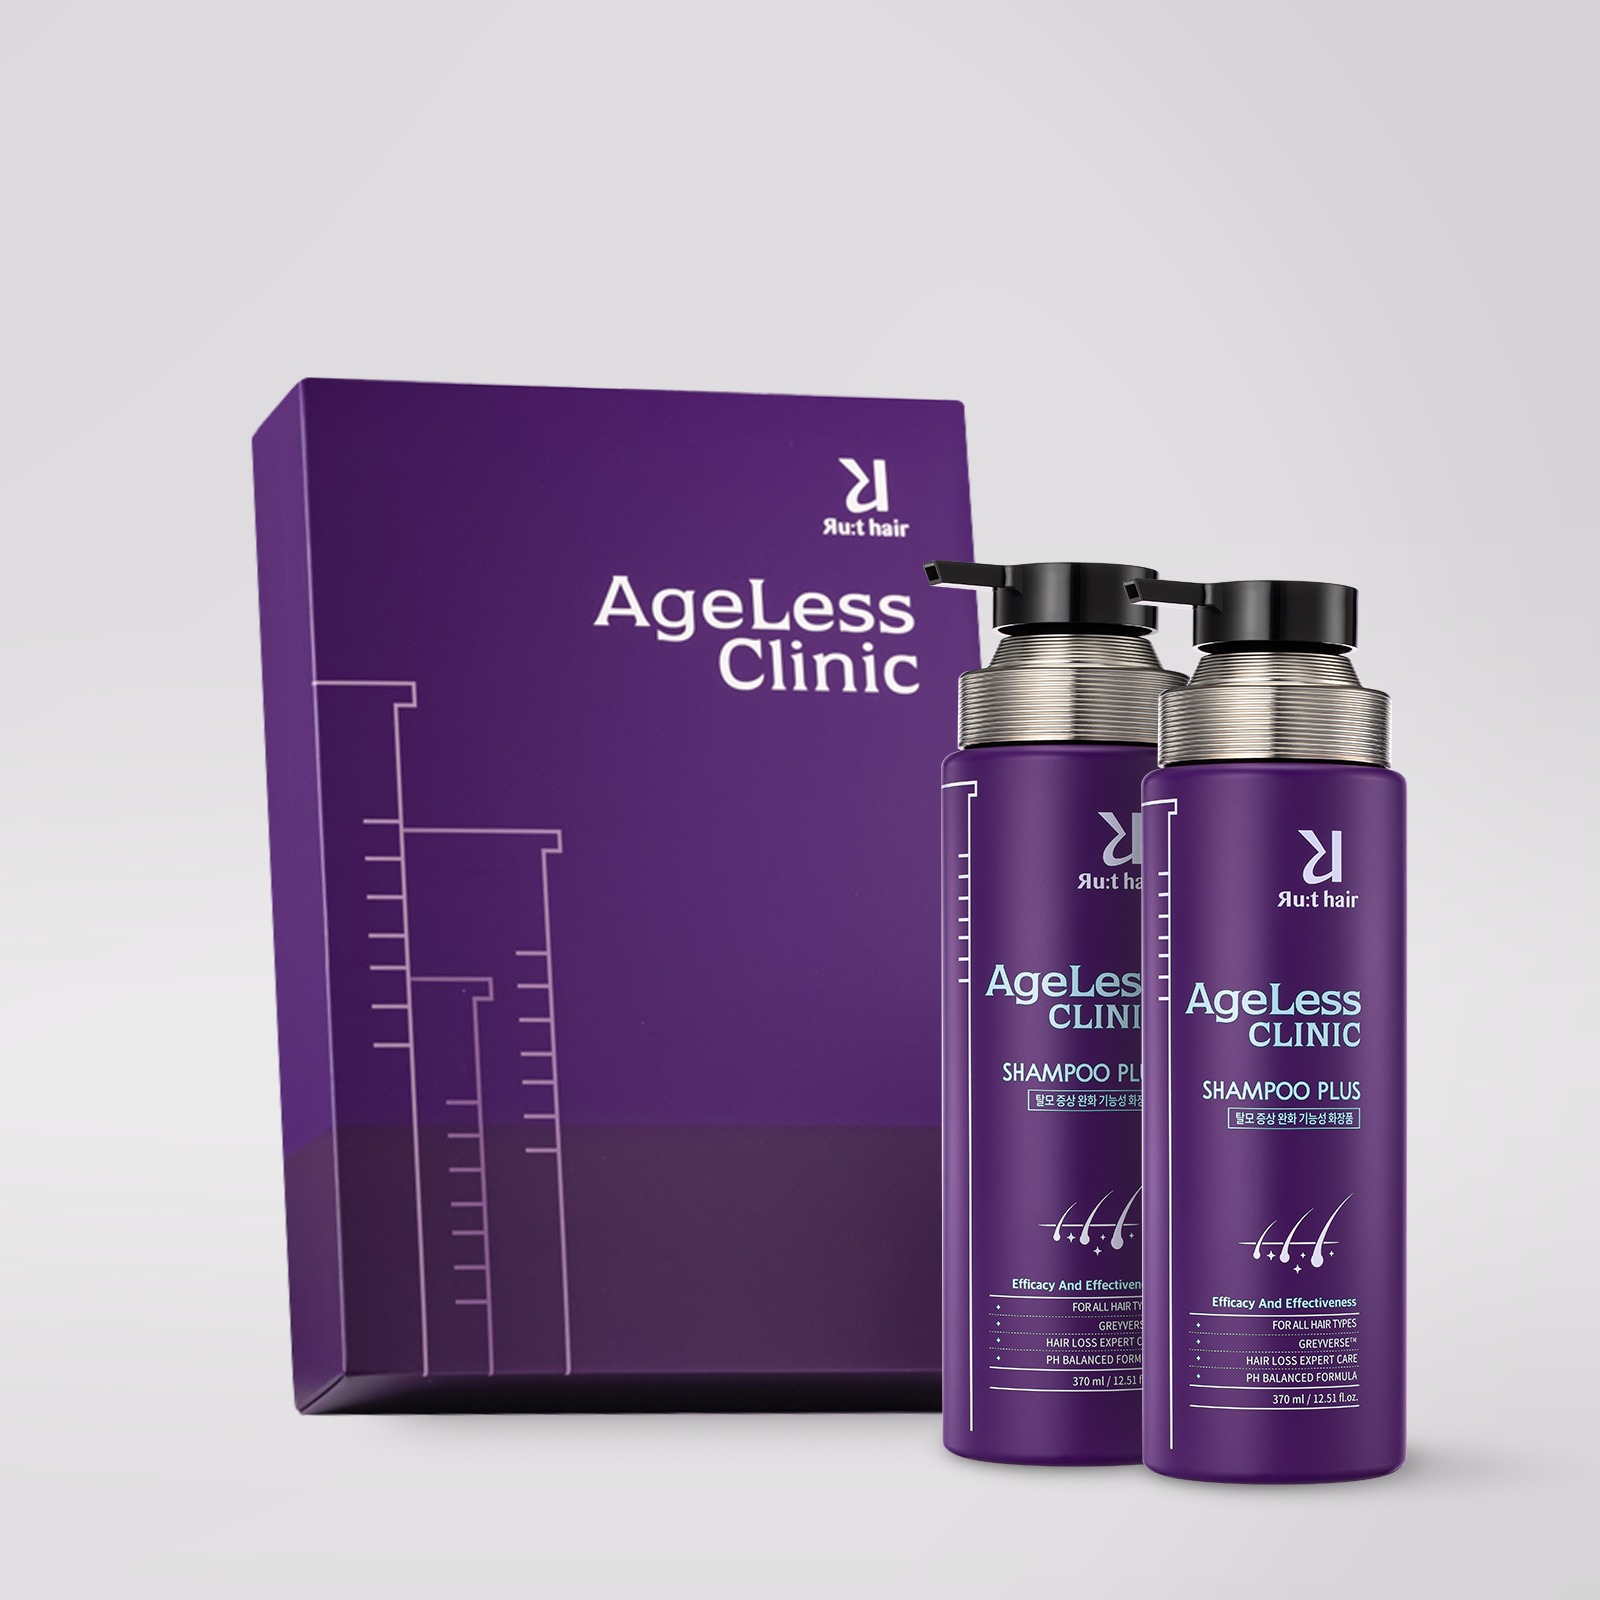 [Family Month &amp; Shopping Bag Presented] Root Hair Ageless Clinic. Shampoo Duo Set (30% off)